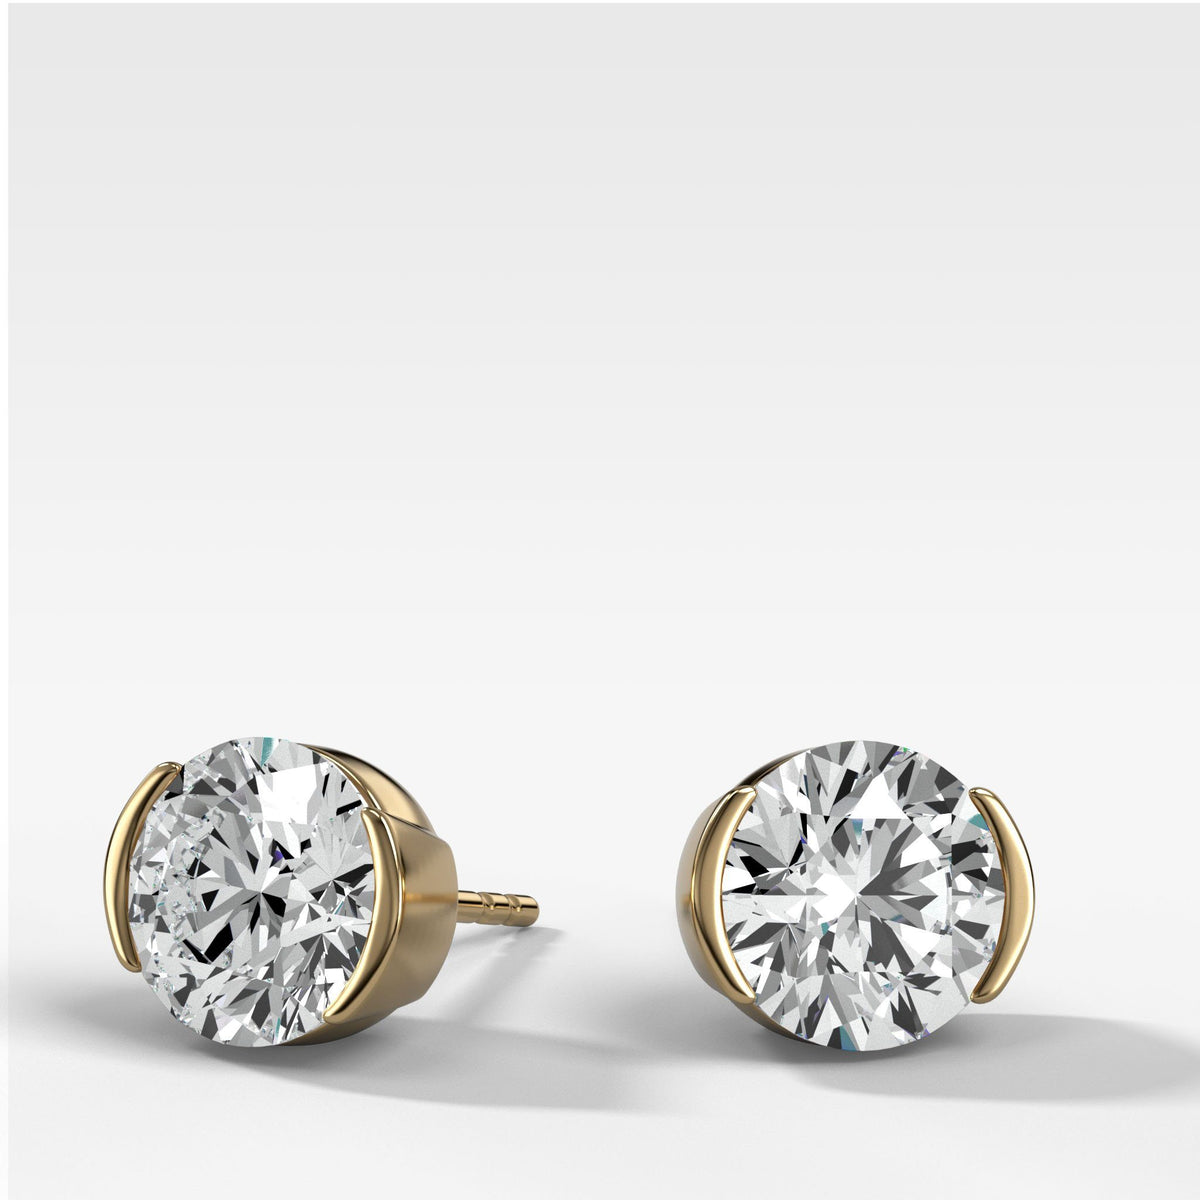 Round Cut Half Bezel Studs by Good Stone in Yellow Gold